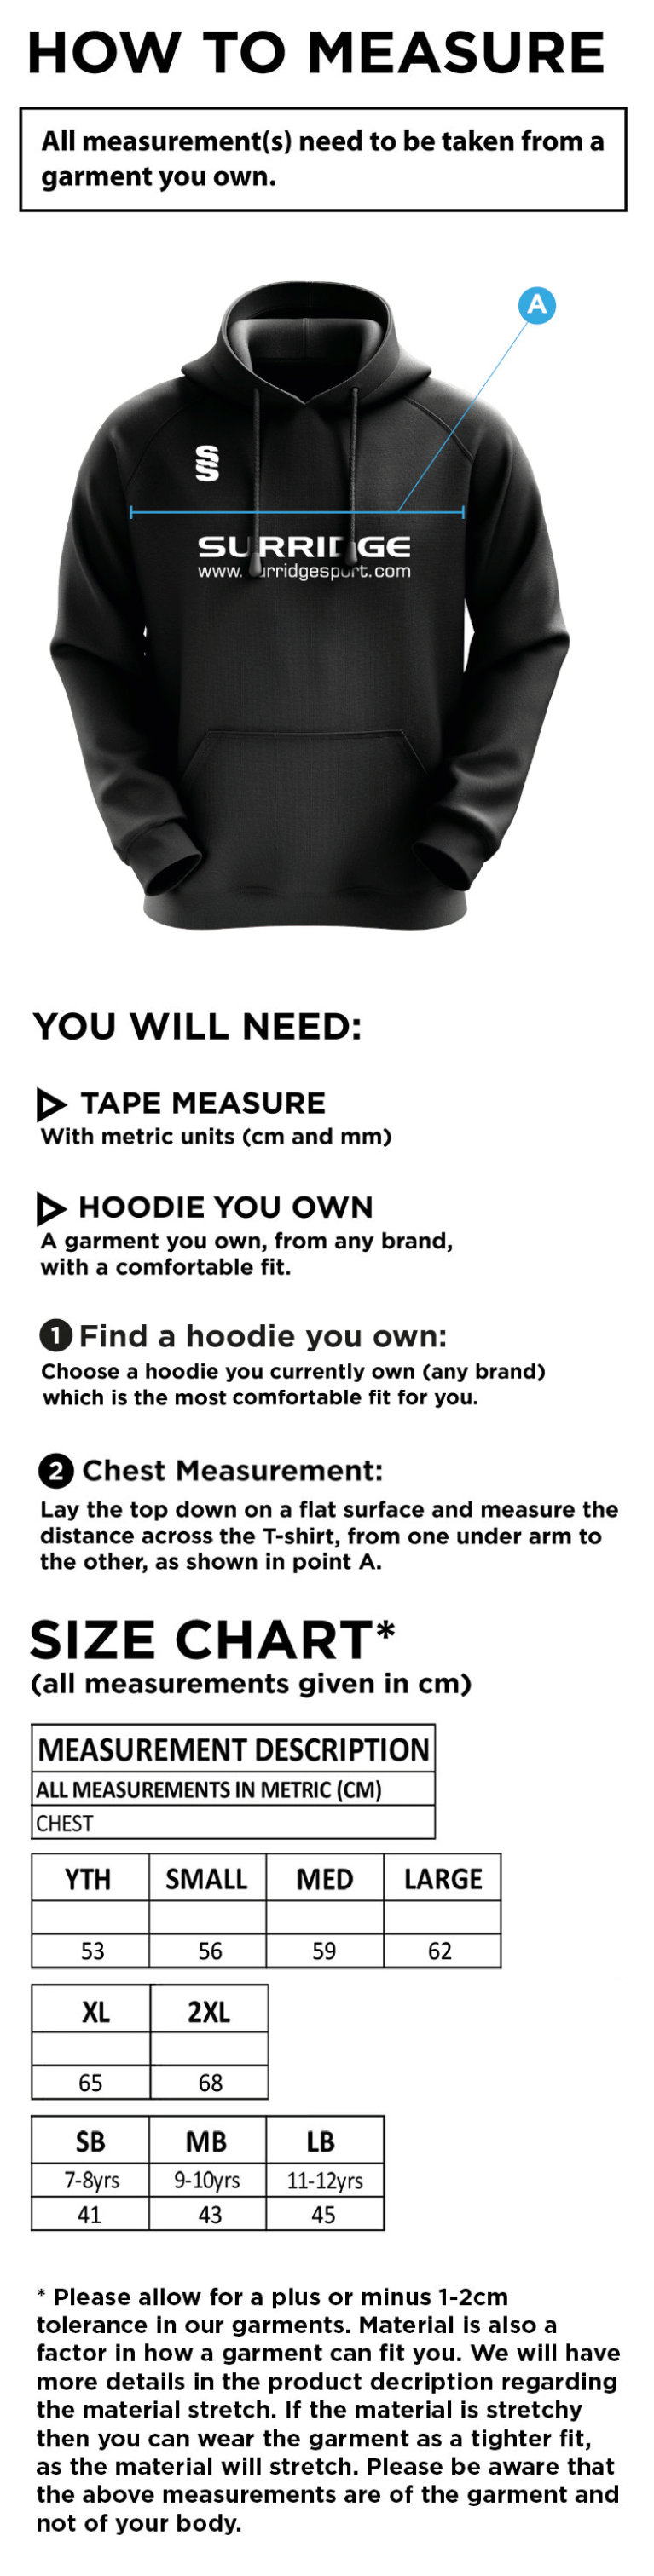 Northern Warriors - Blade Hoody - Size Guide